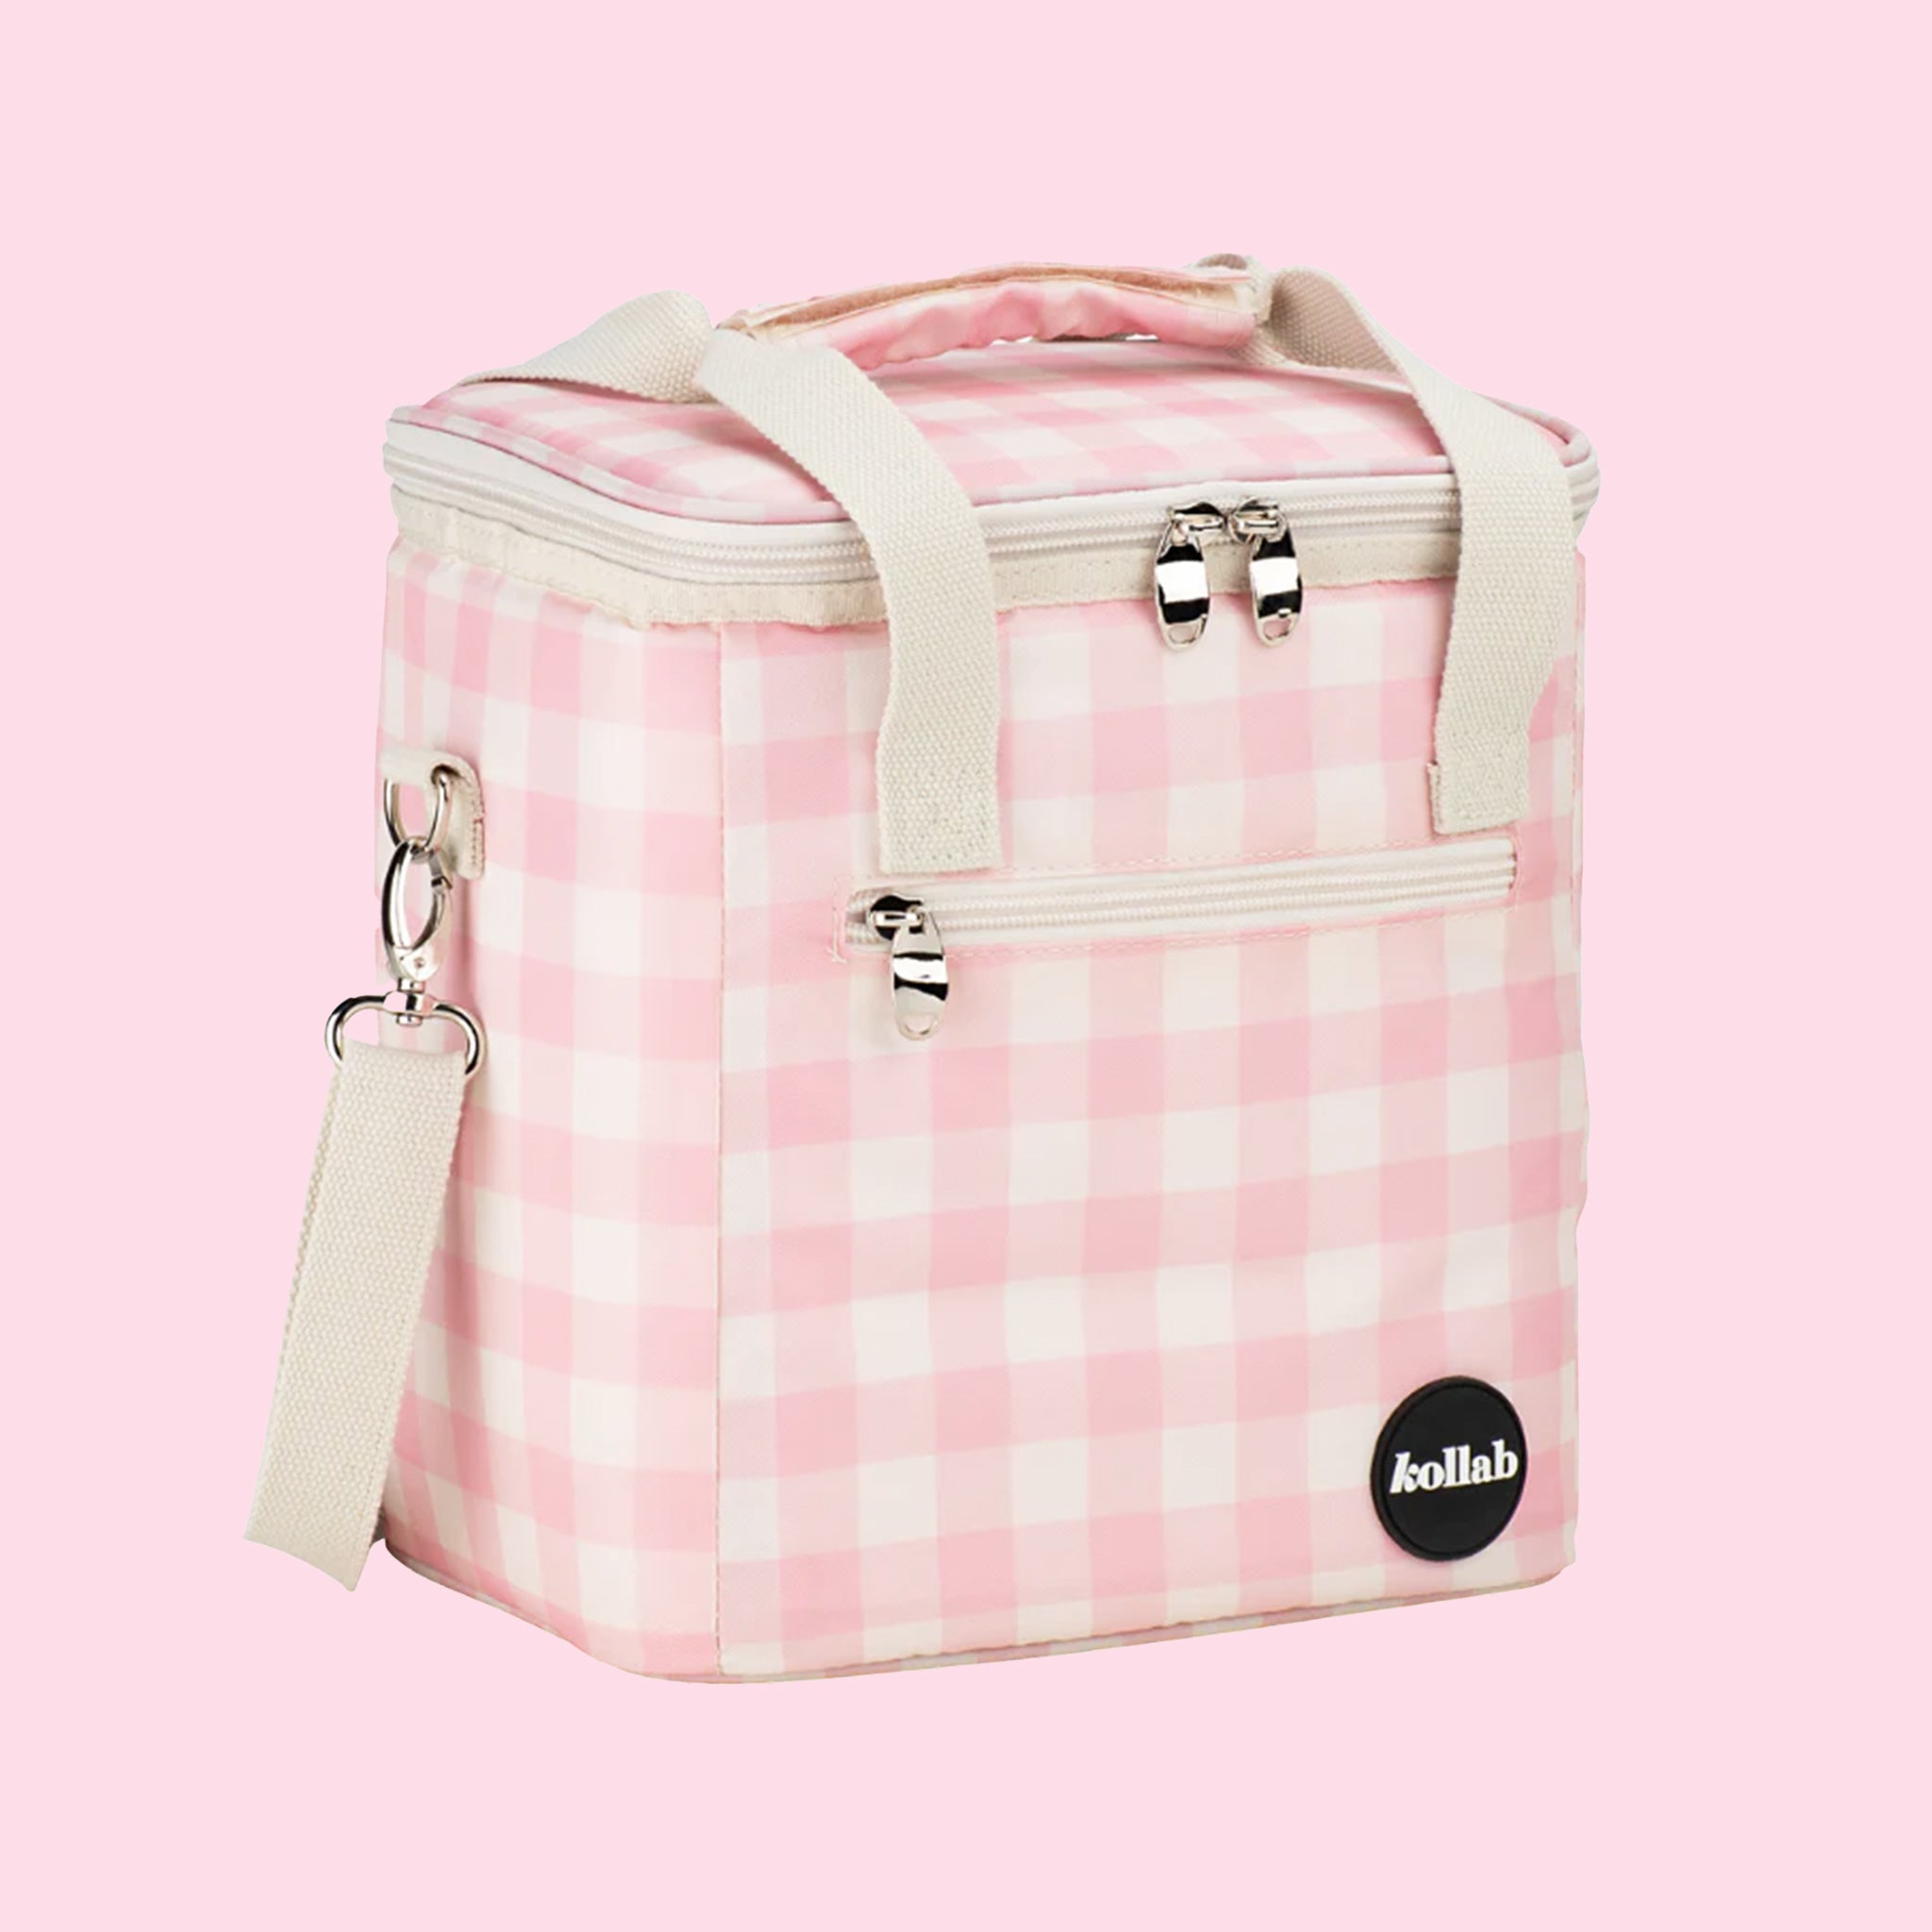 On a light pink background is a pink and white cooler bag with a long adjustable strap.